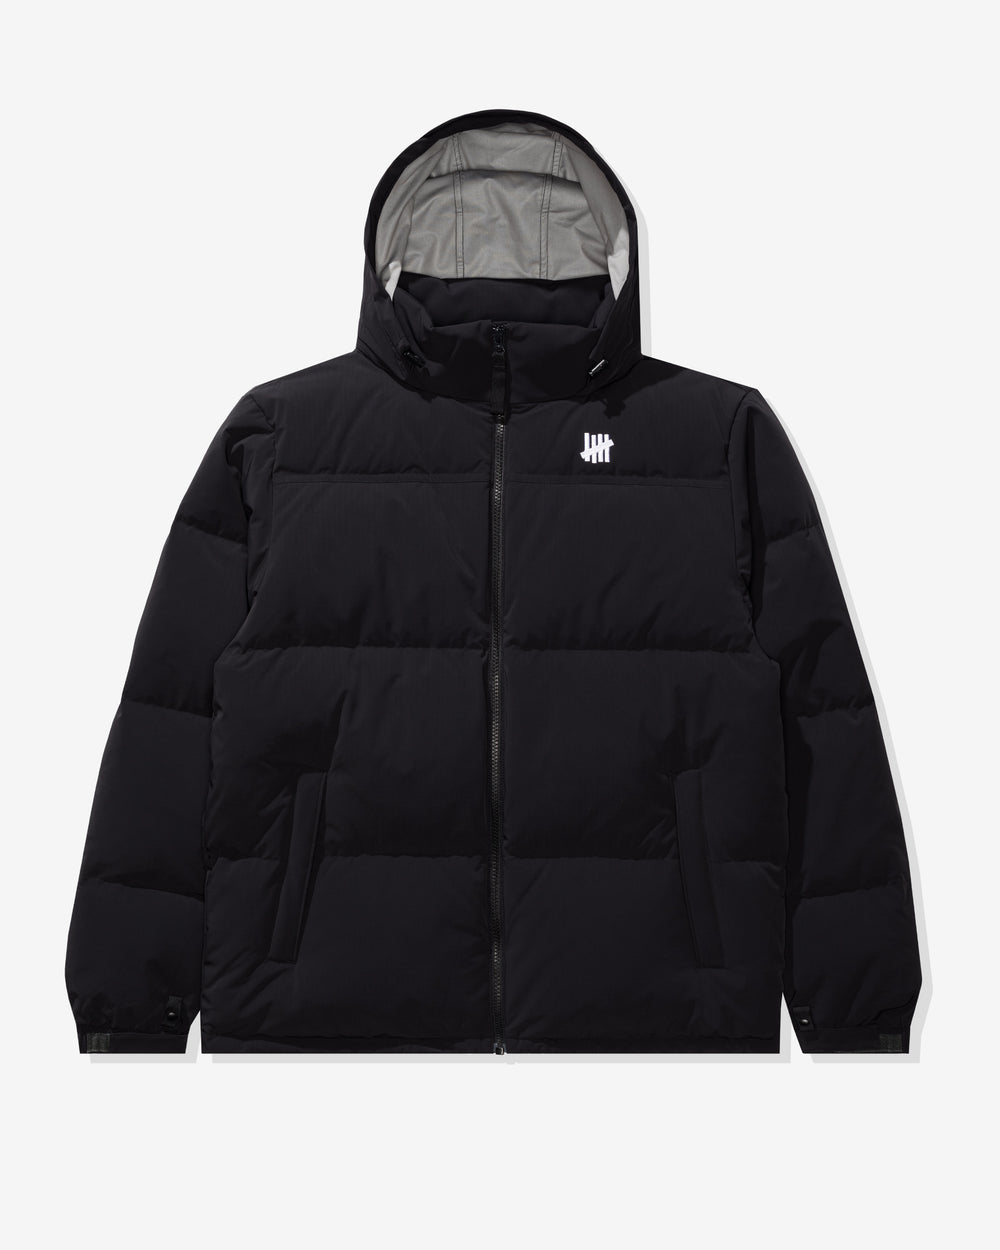 Undefeated Outdoor Puffer Jacket XL